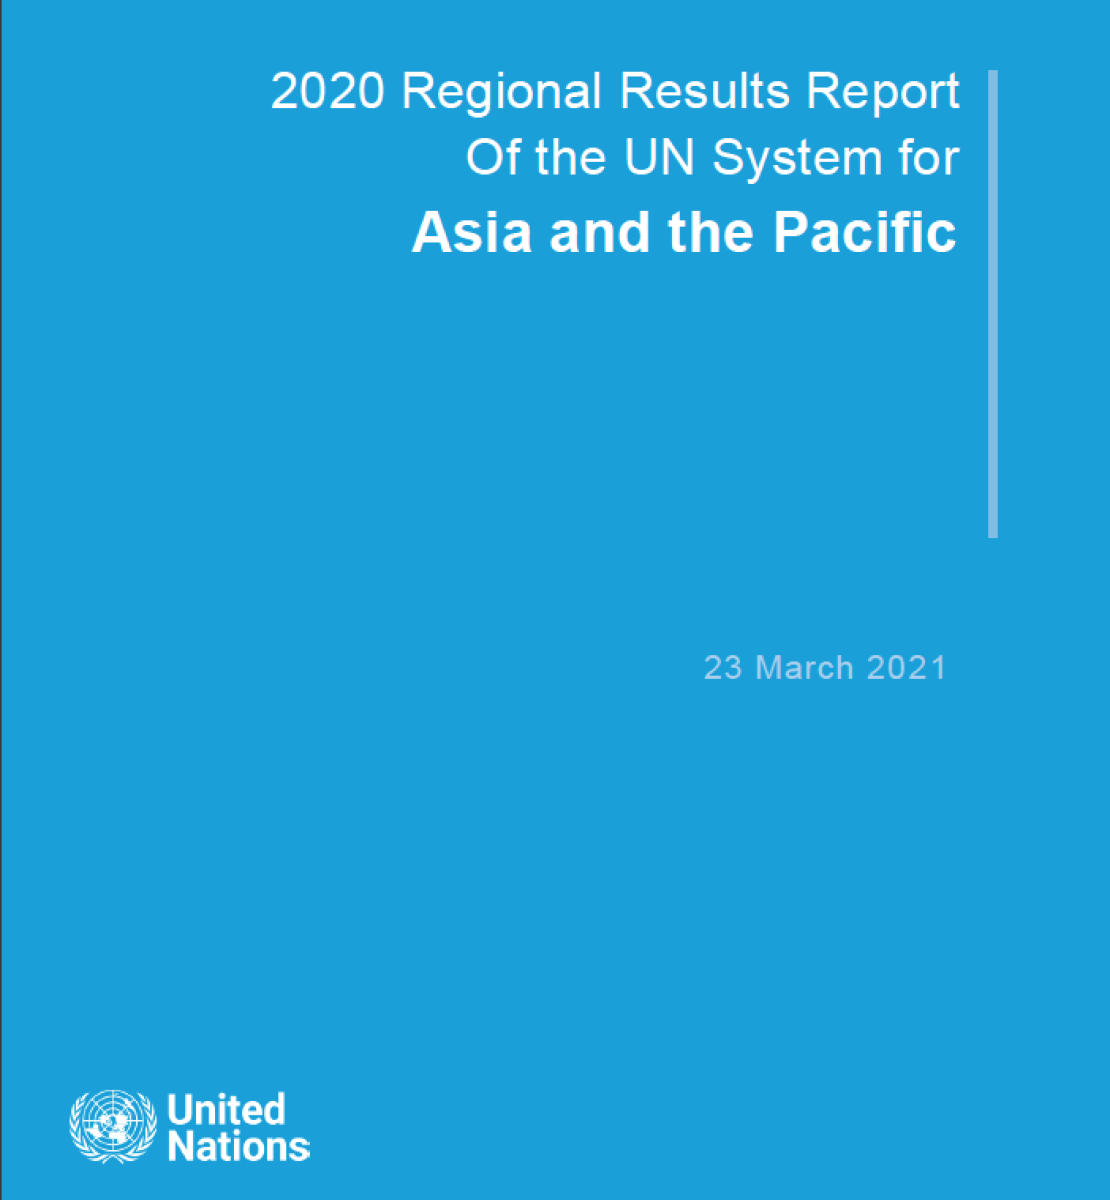 Blue cover shows the title in white letters at the top right and the UN emblem on the bottom left.